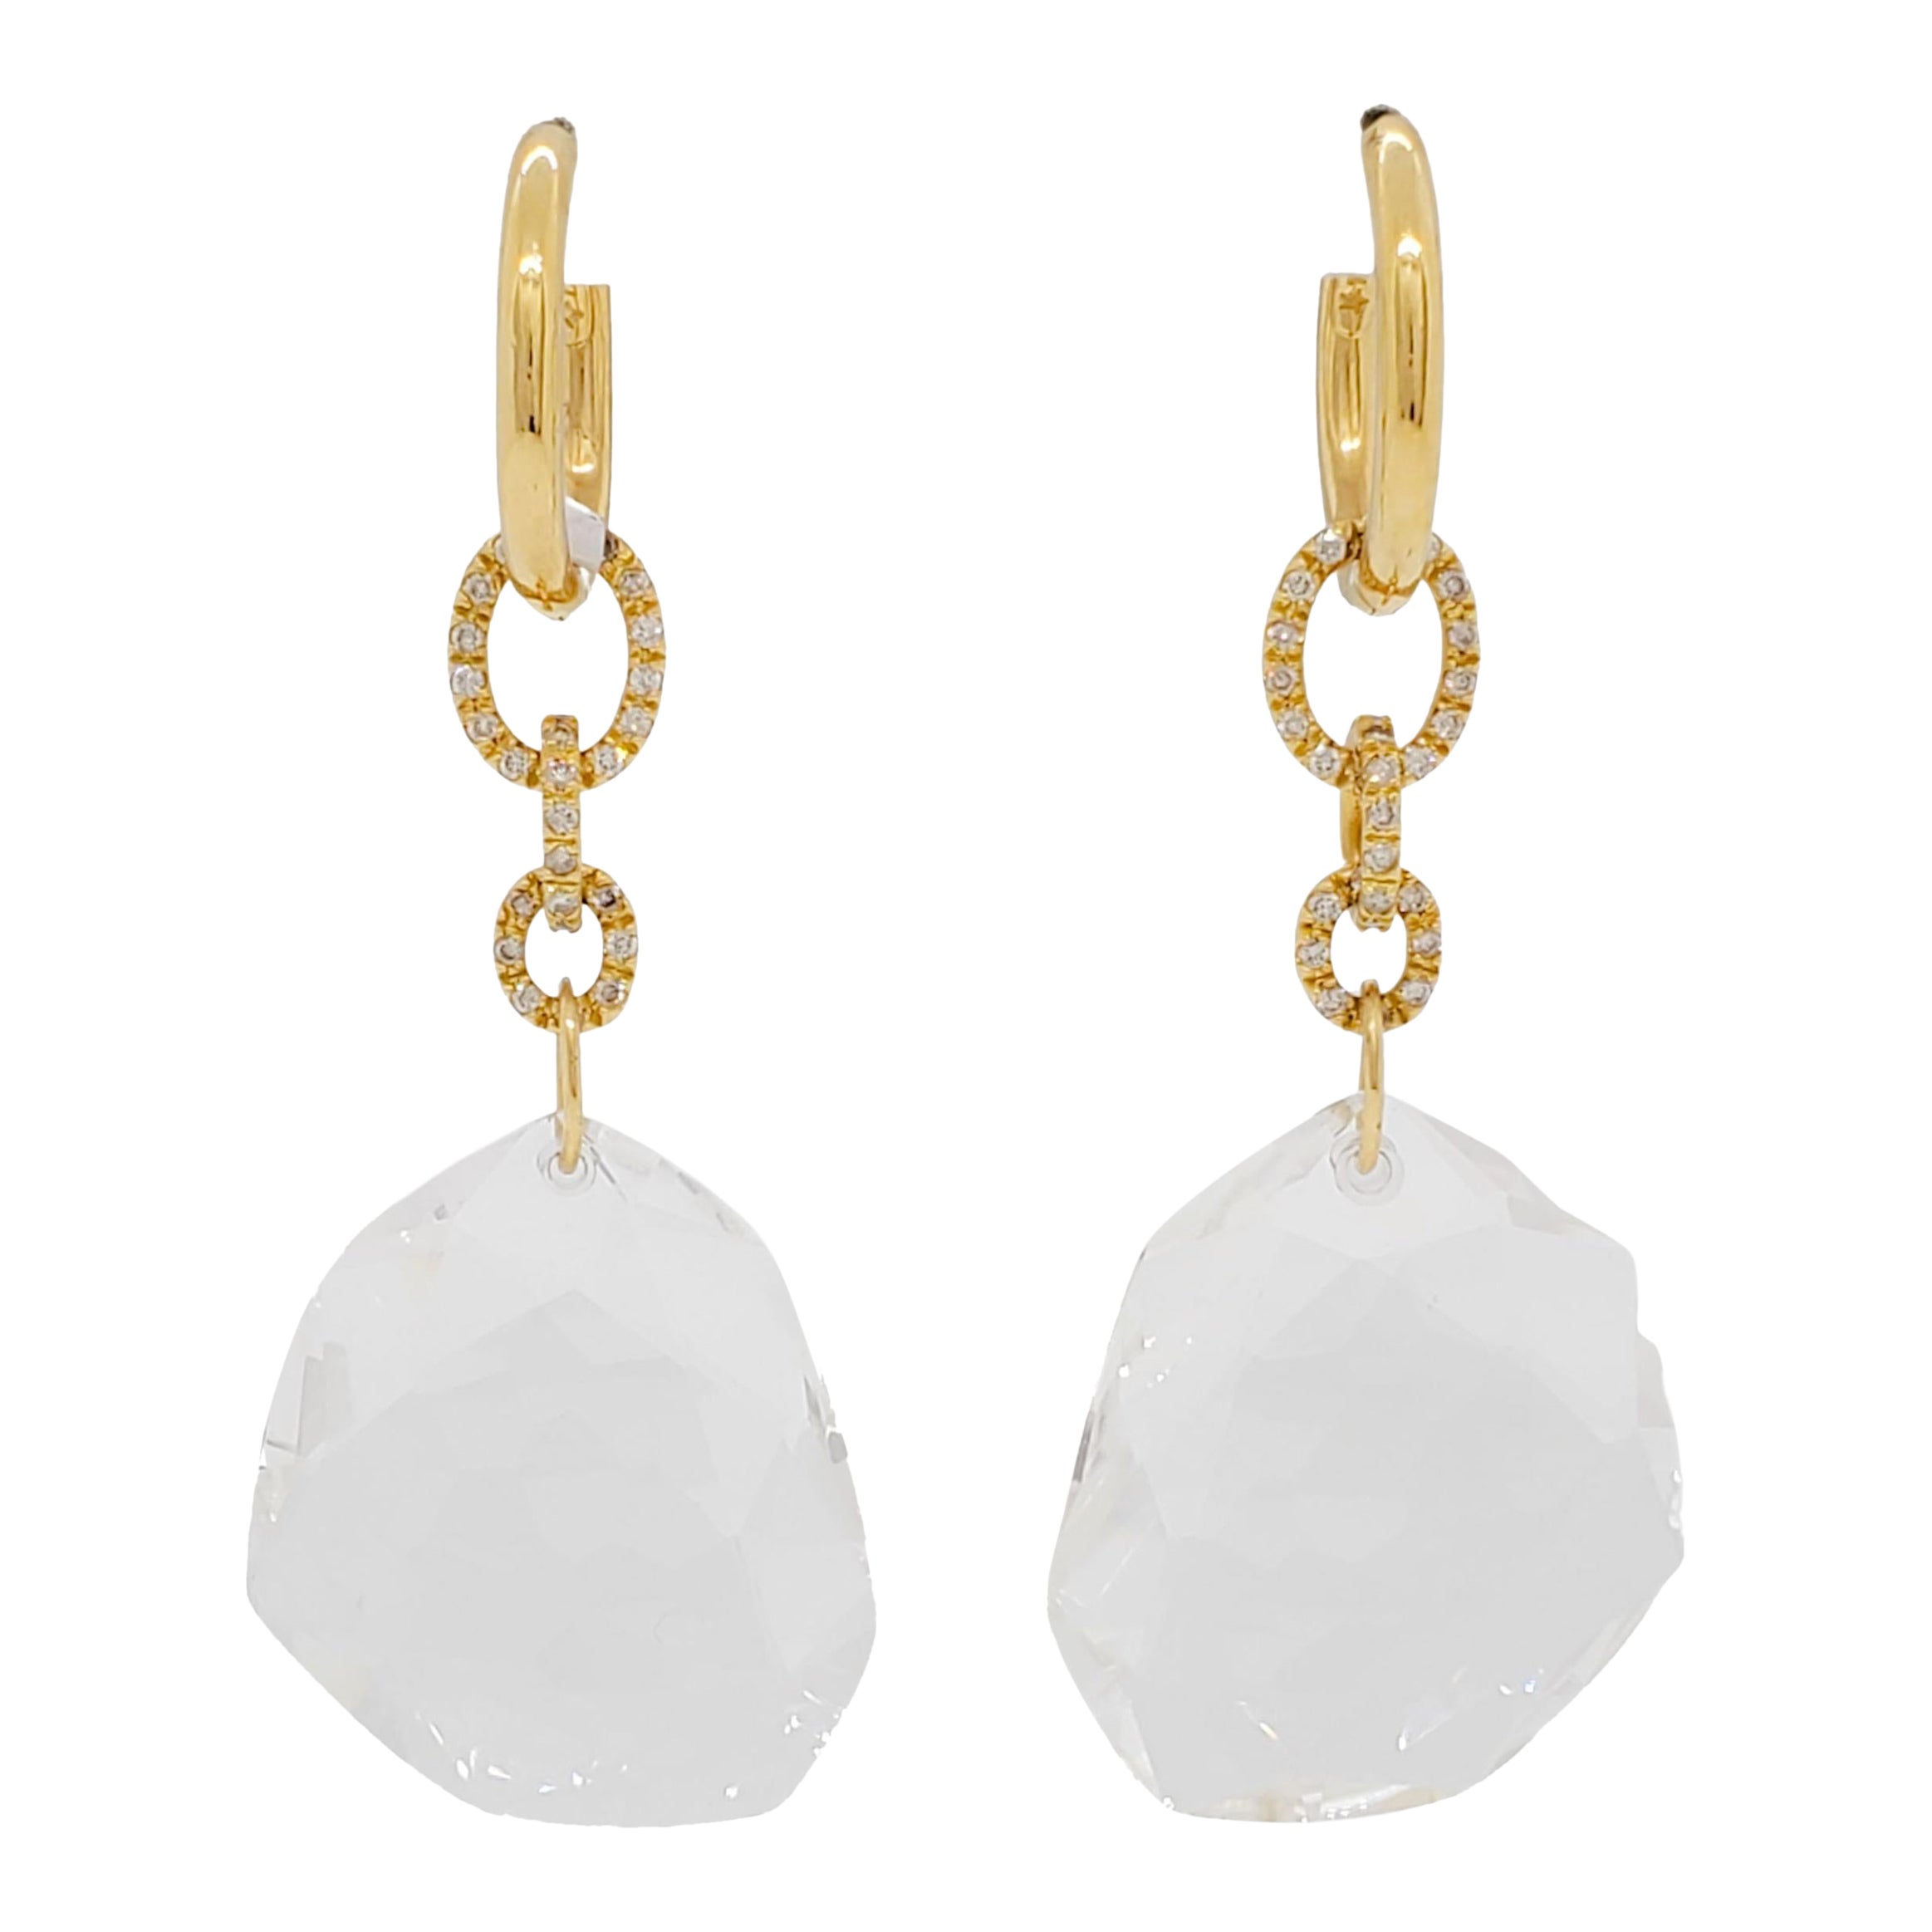 H. Stern and DVF Collaboration Dangle Earrings with Diamonds in 18k Yellow Gold